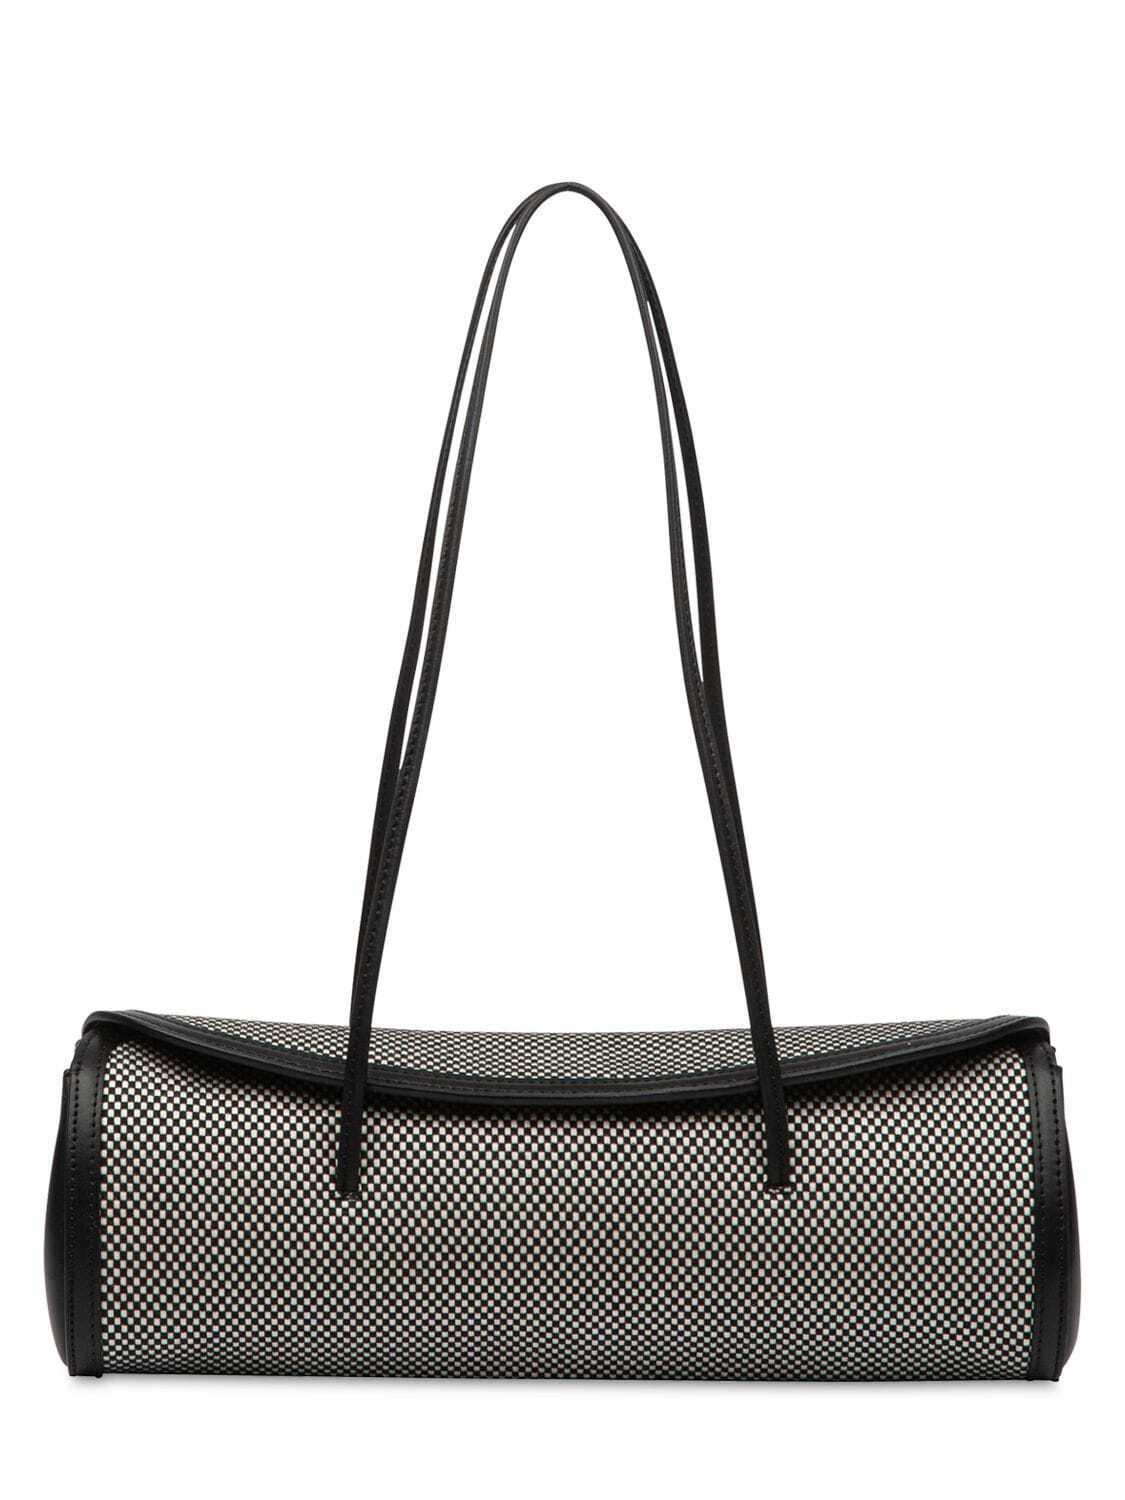 LITTLE LIFFNER Cannoli Cotton & Leather Bag in black / white